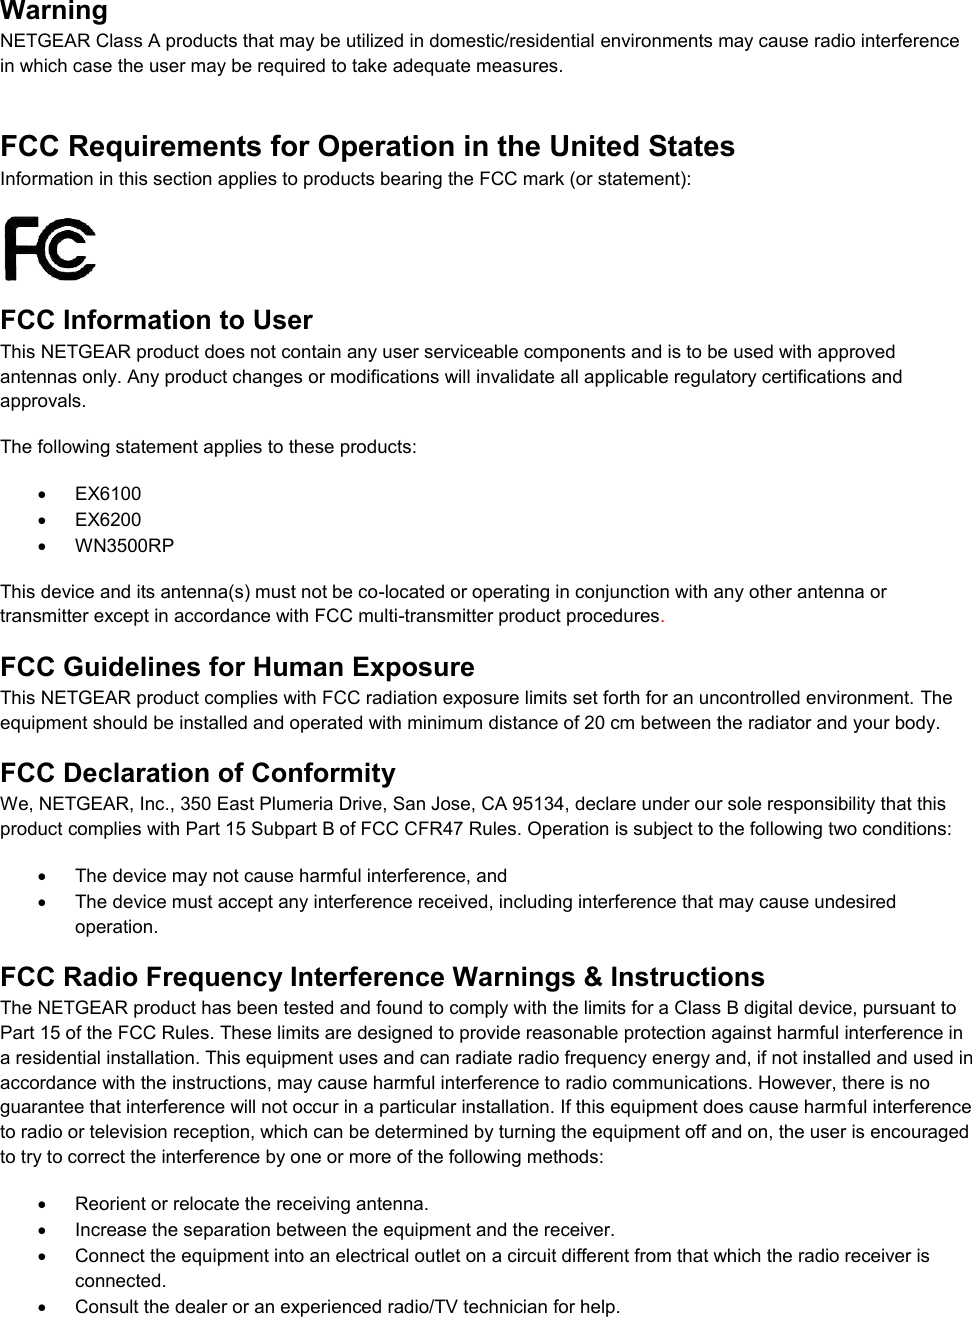  Warning NETGEAR Class A products that may be utilized in domestic/residential environments may cause radio interference in which case the user may be required to take adequate measures.  FCC Requirements for Operation in the United States Information in this section applies to products bearing the FCC mark (or statement):   FCC Information to User This NETGEAR product does not contain any user serviceable components and is to be used with approved antennas only. Any product changes or modifications will invalidate all applicable regulatory certifications and approvals. The following statement applies to these products:   EX6100   EX6200   WN3500RP This device and its antenna(s) must not be co-located or operating in conjunction with any other antenna or transmitter except in accordance with FCC multi-transmitter product procedures.  FCC Guidelines for Human Exposure This NETGEAR product complies with FCC radiation exposure limits set forth for an uncontrolled environment. The equipment should be installed and operated with minimum distance of 20 cm between the radiator and your body. FCC Declaration of Conformity We, NETGEAR, Inc., 350 East Plumeria Drive, San Jose, CA 95134, declare under our sole responsibility that this product complies with Part 15 Subpart B of FCC CFR47 Rules. Operation is subject to the following two conditions:   The device may not cause harmful interference, and   The device must accept any interference received, including interference that may cause undesired operation. FCC Radio Frequency Interference Warnings &amp; Instructions The NETGEAR product has been tested and found to comply with the limits for a Class B digital device, pursuant to Part 15 of the FCC Rules. These limits are designed to provide reasonable protection against harmful interference in a residential installation. This equipment uses and can radiate radio frequency energy and, if not installed and used in accordance with the instructions, may cause harmful interference to radio communications. However, there is no guarantee that interference will not occur in a particular installation. If this equipment does cause harmful interference to radio or television reception, which can be determined by turning the equipment off and on, the user is encouraged to try to correct the interference by one or more of the following methods:   Reorient or relocate the receiving antenna.   Increase the separation between the equipment and the receiver.   Connect the equipment into an electrical outlet on a circuit different from that which the radio receiver is connected.   Consult the dealer or an experienced radio/TV technician for help. 